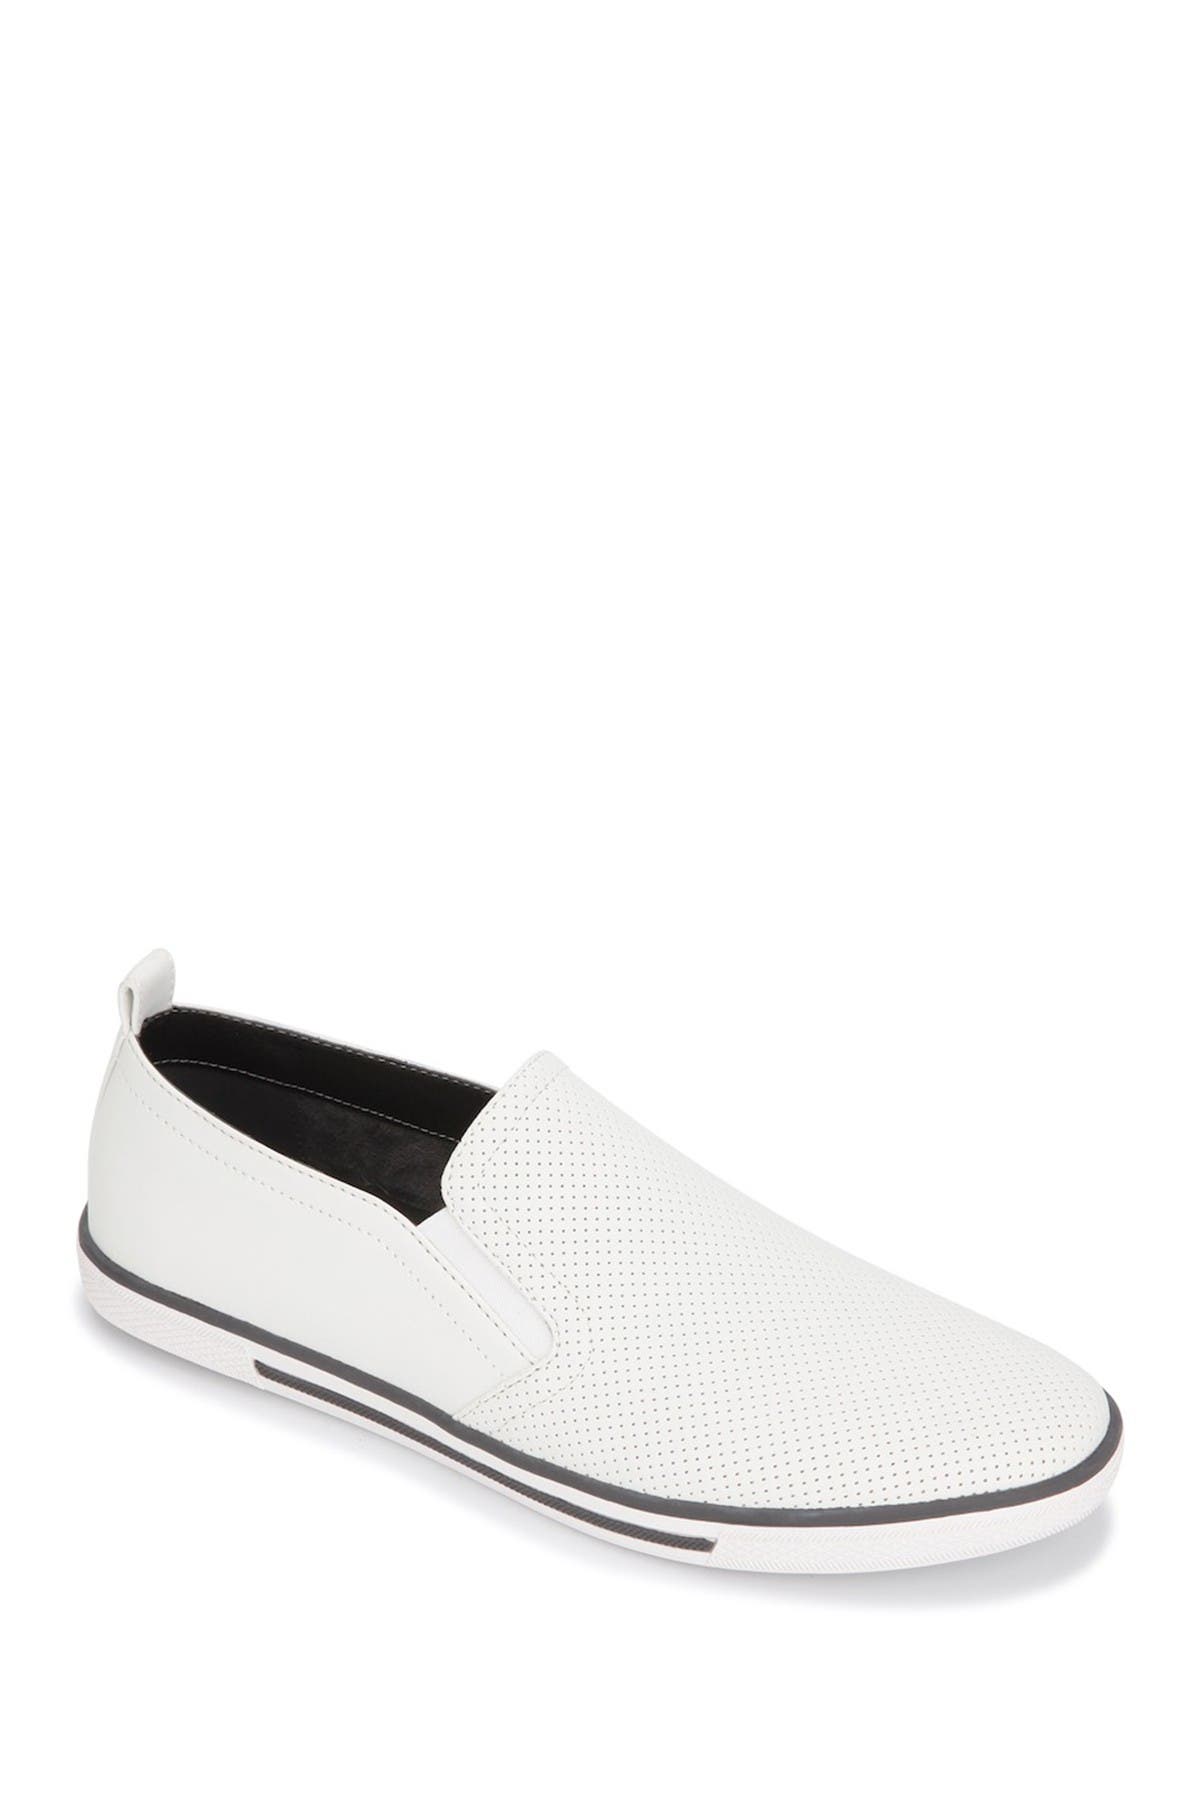 kenneth cole reaction slip on sneakers